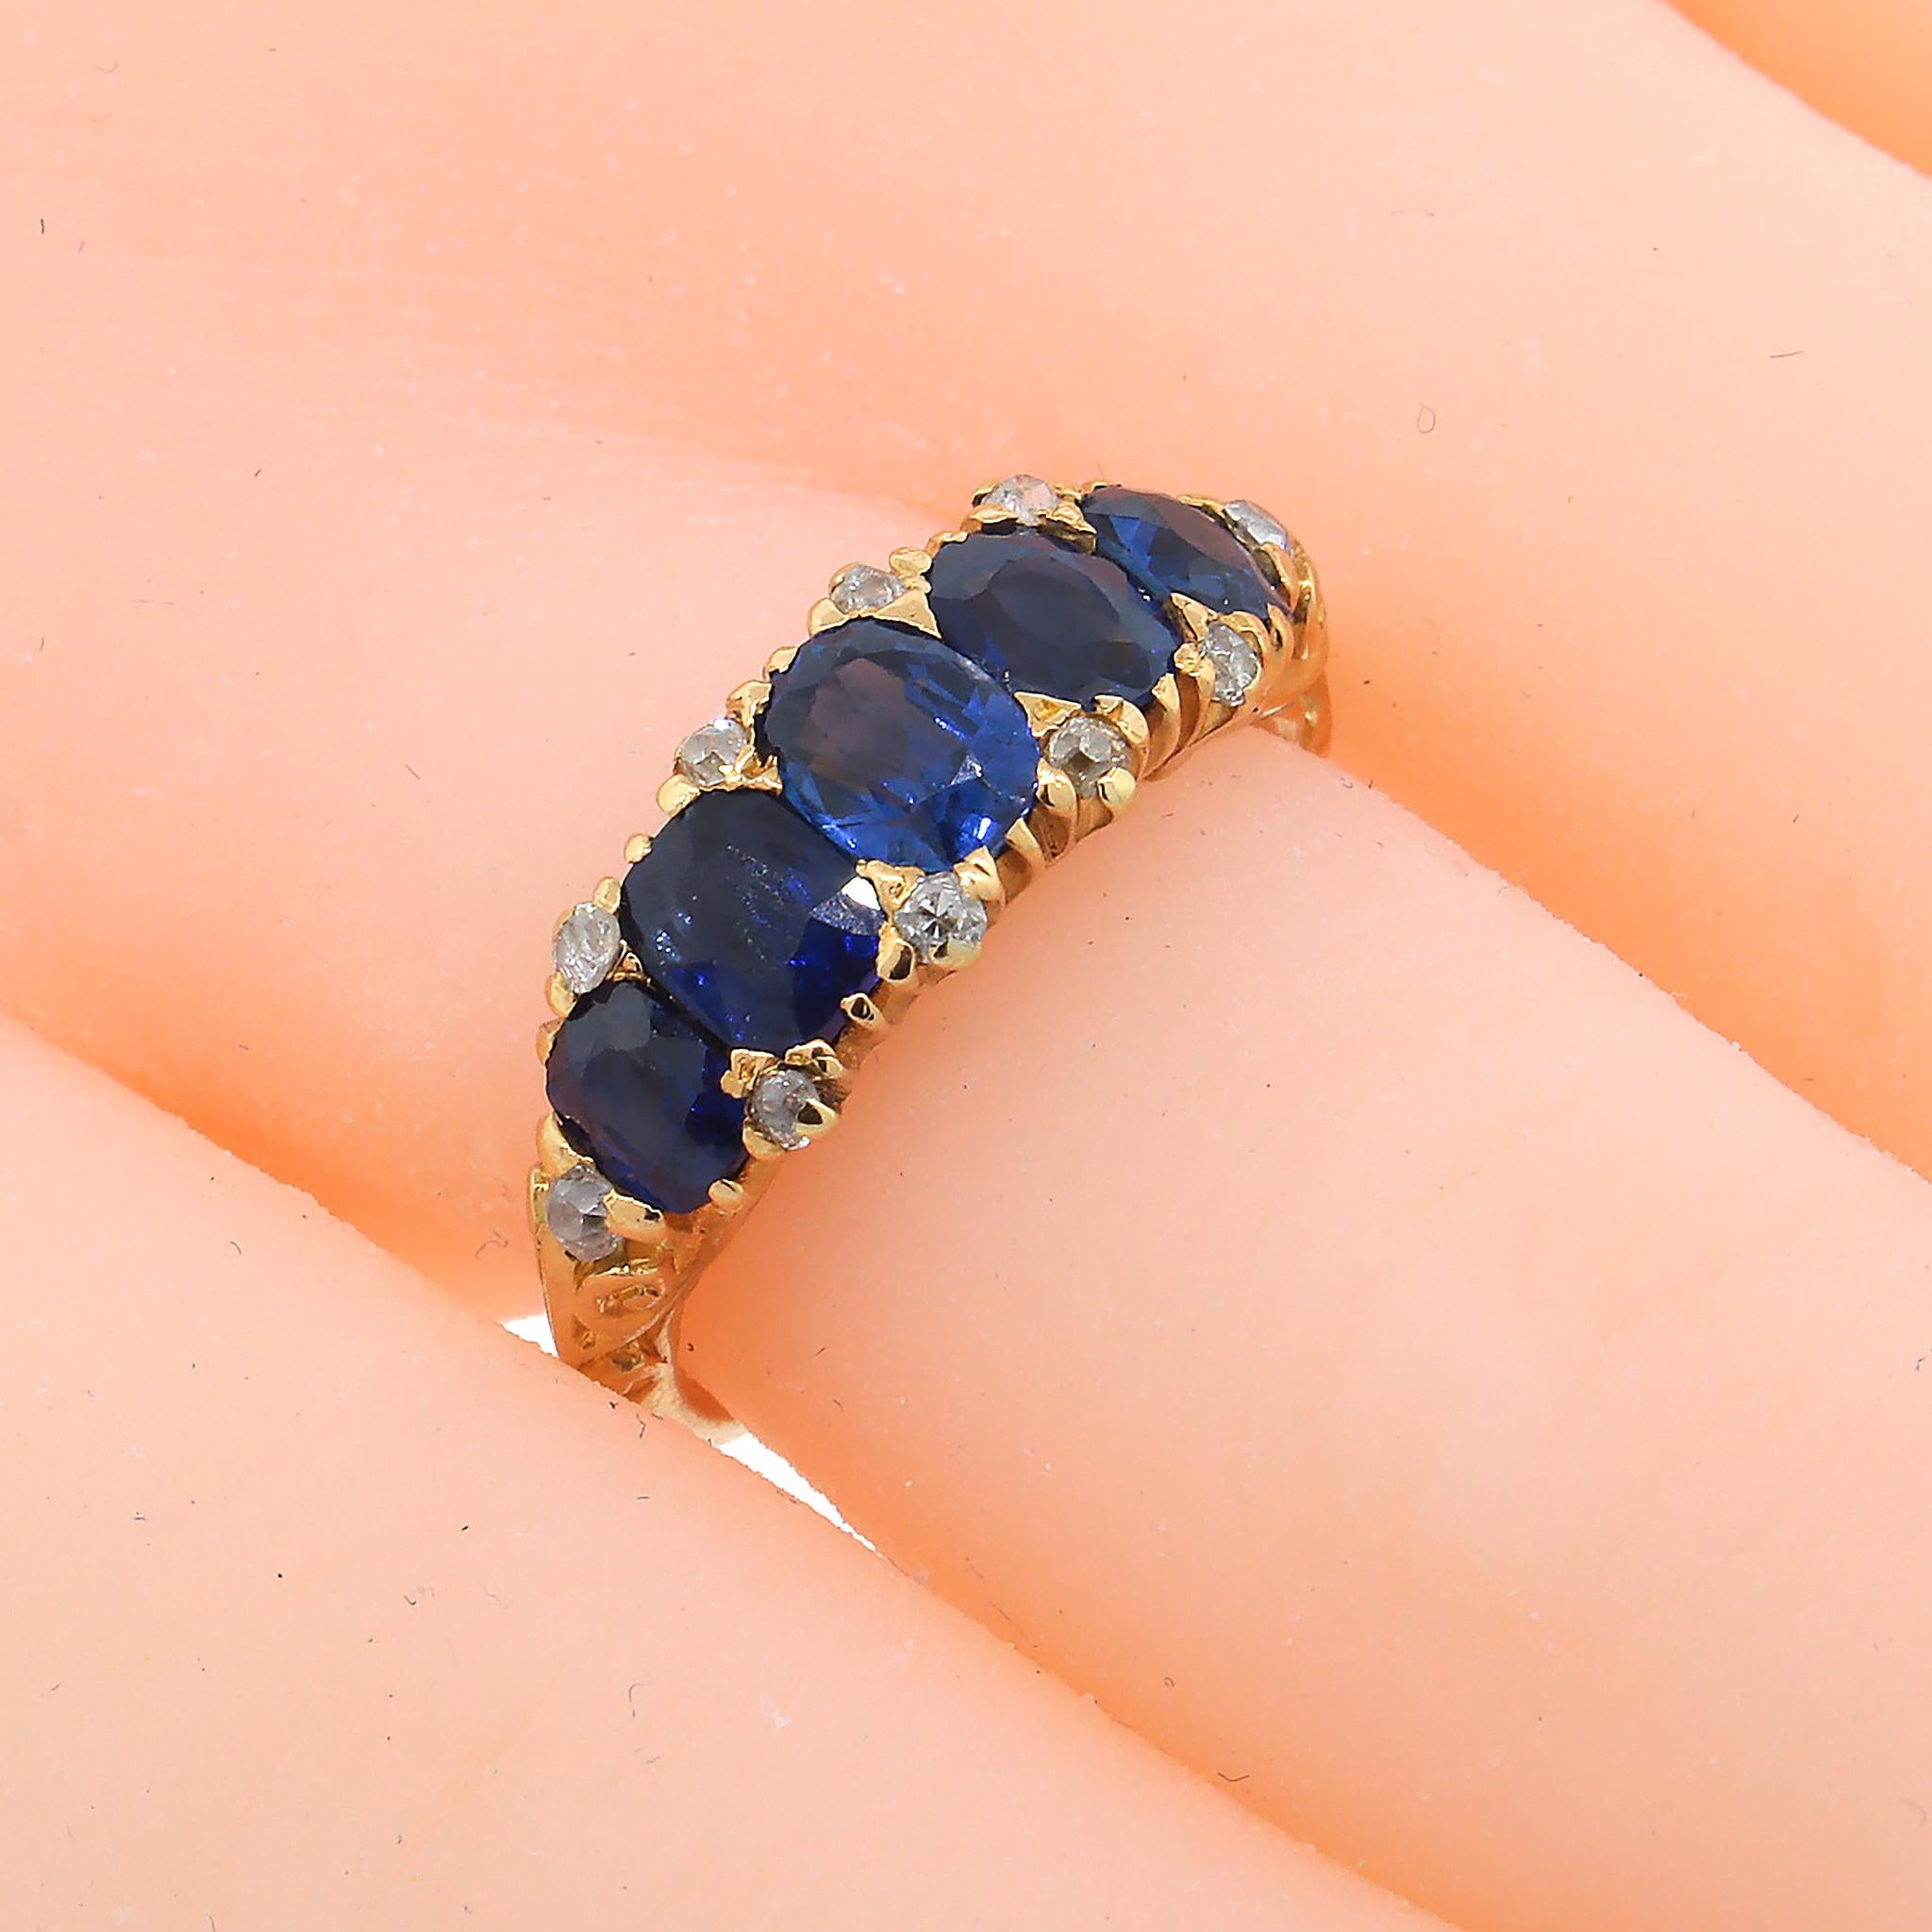 The traditional look of this lovely ring ensures it will be a hit with anyone who loves vintage-style jewelry and would make a wonderful gift.

Very Rich Color Sapphires accented with diamonds.

18k Yellow Gold
Ring Size: 6
Total Weight: 5.0